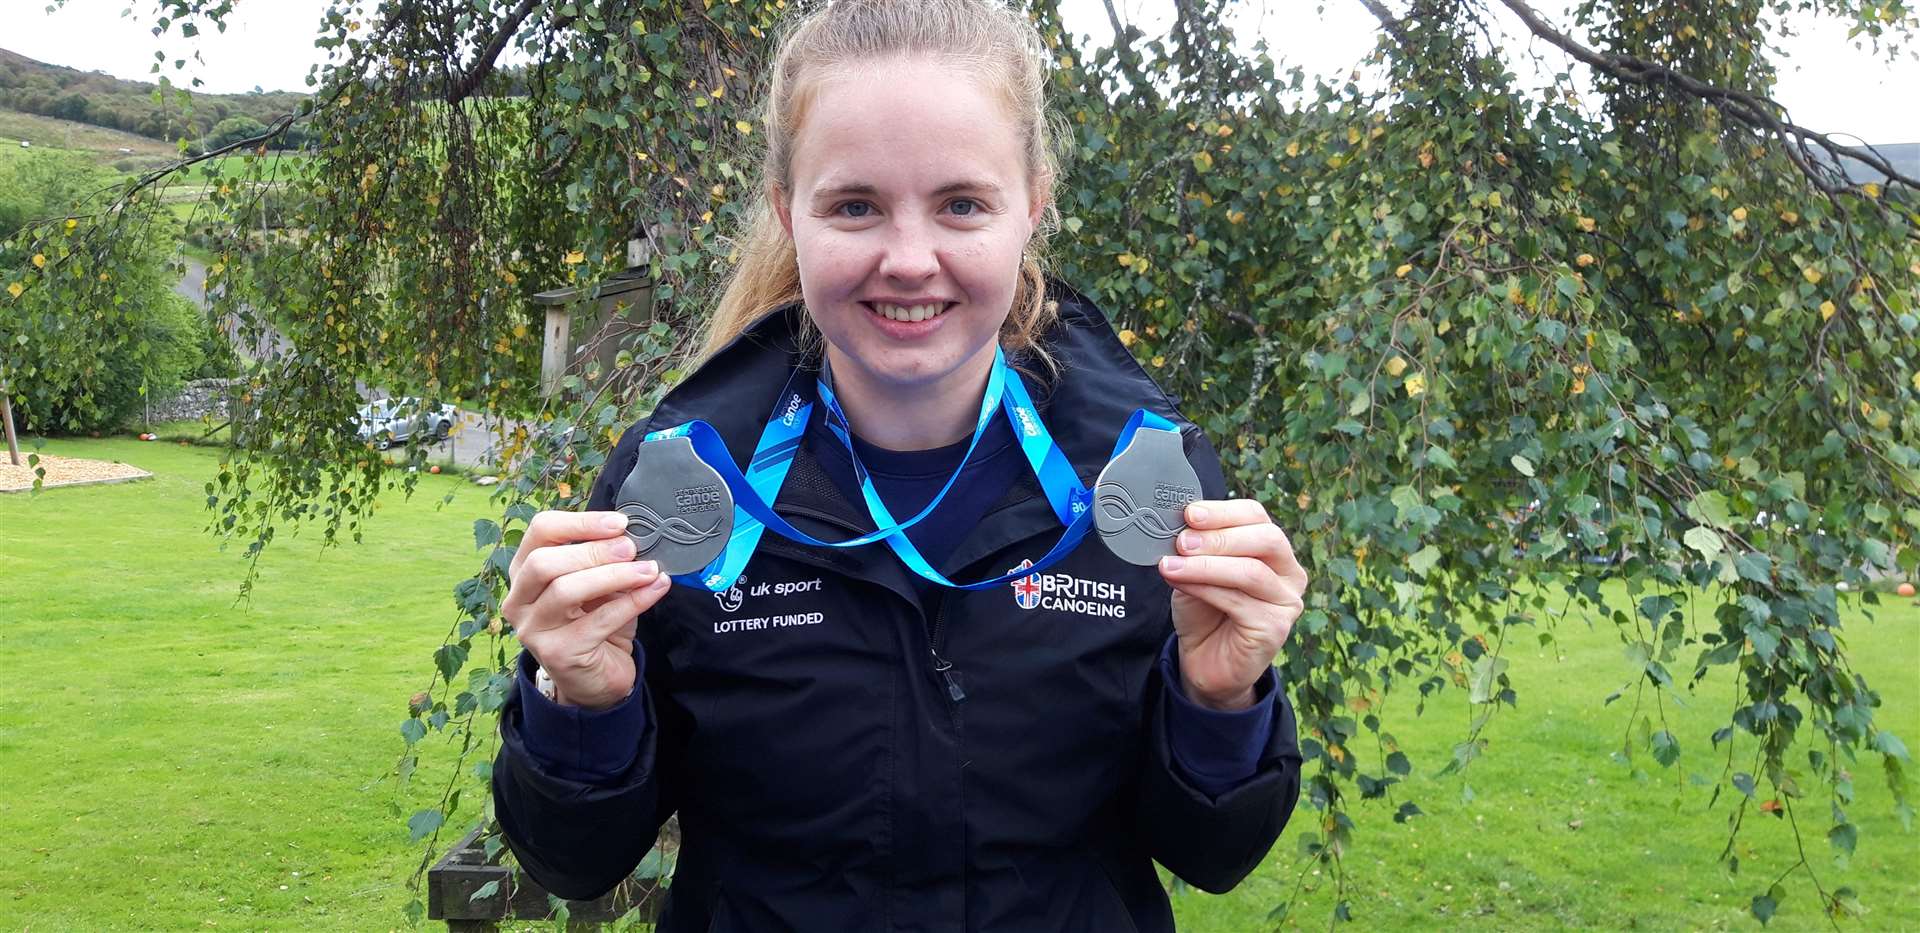 Hope Gordon with the silver medals she won in the KL3 200m Kayak and Va'a races in the 2021 World Canoe Championships.